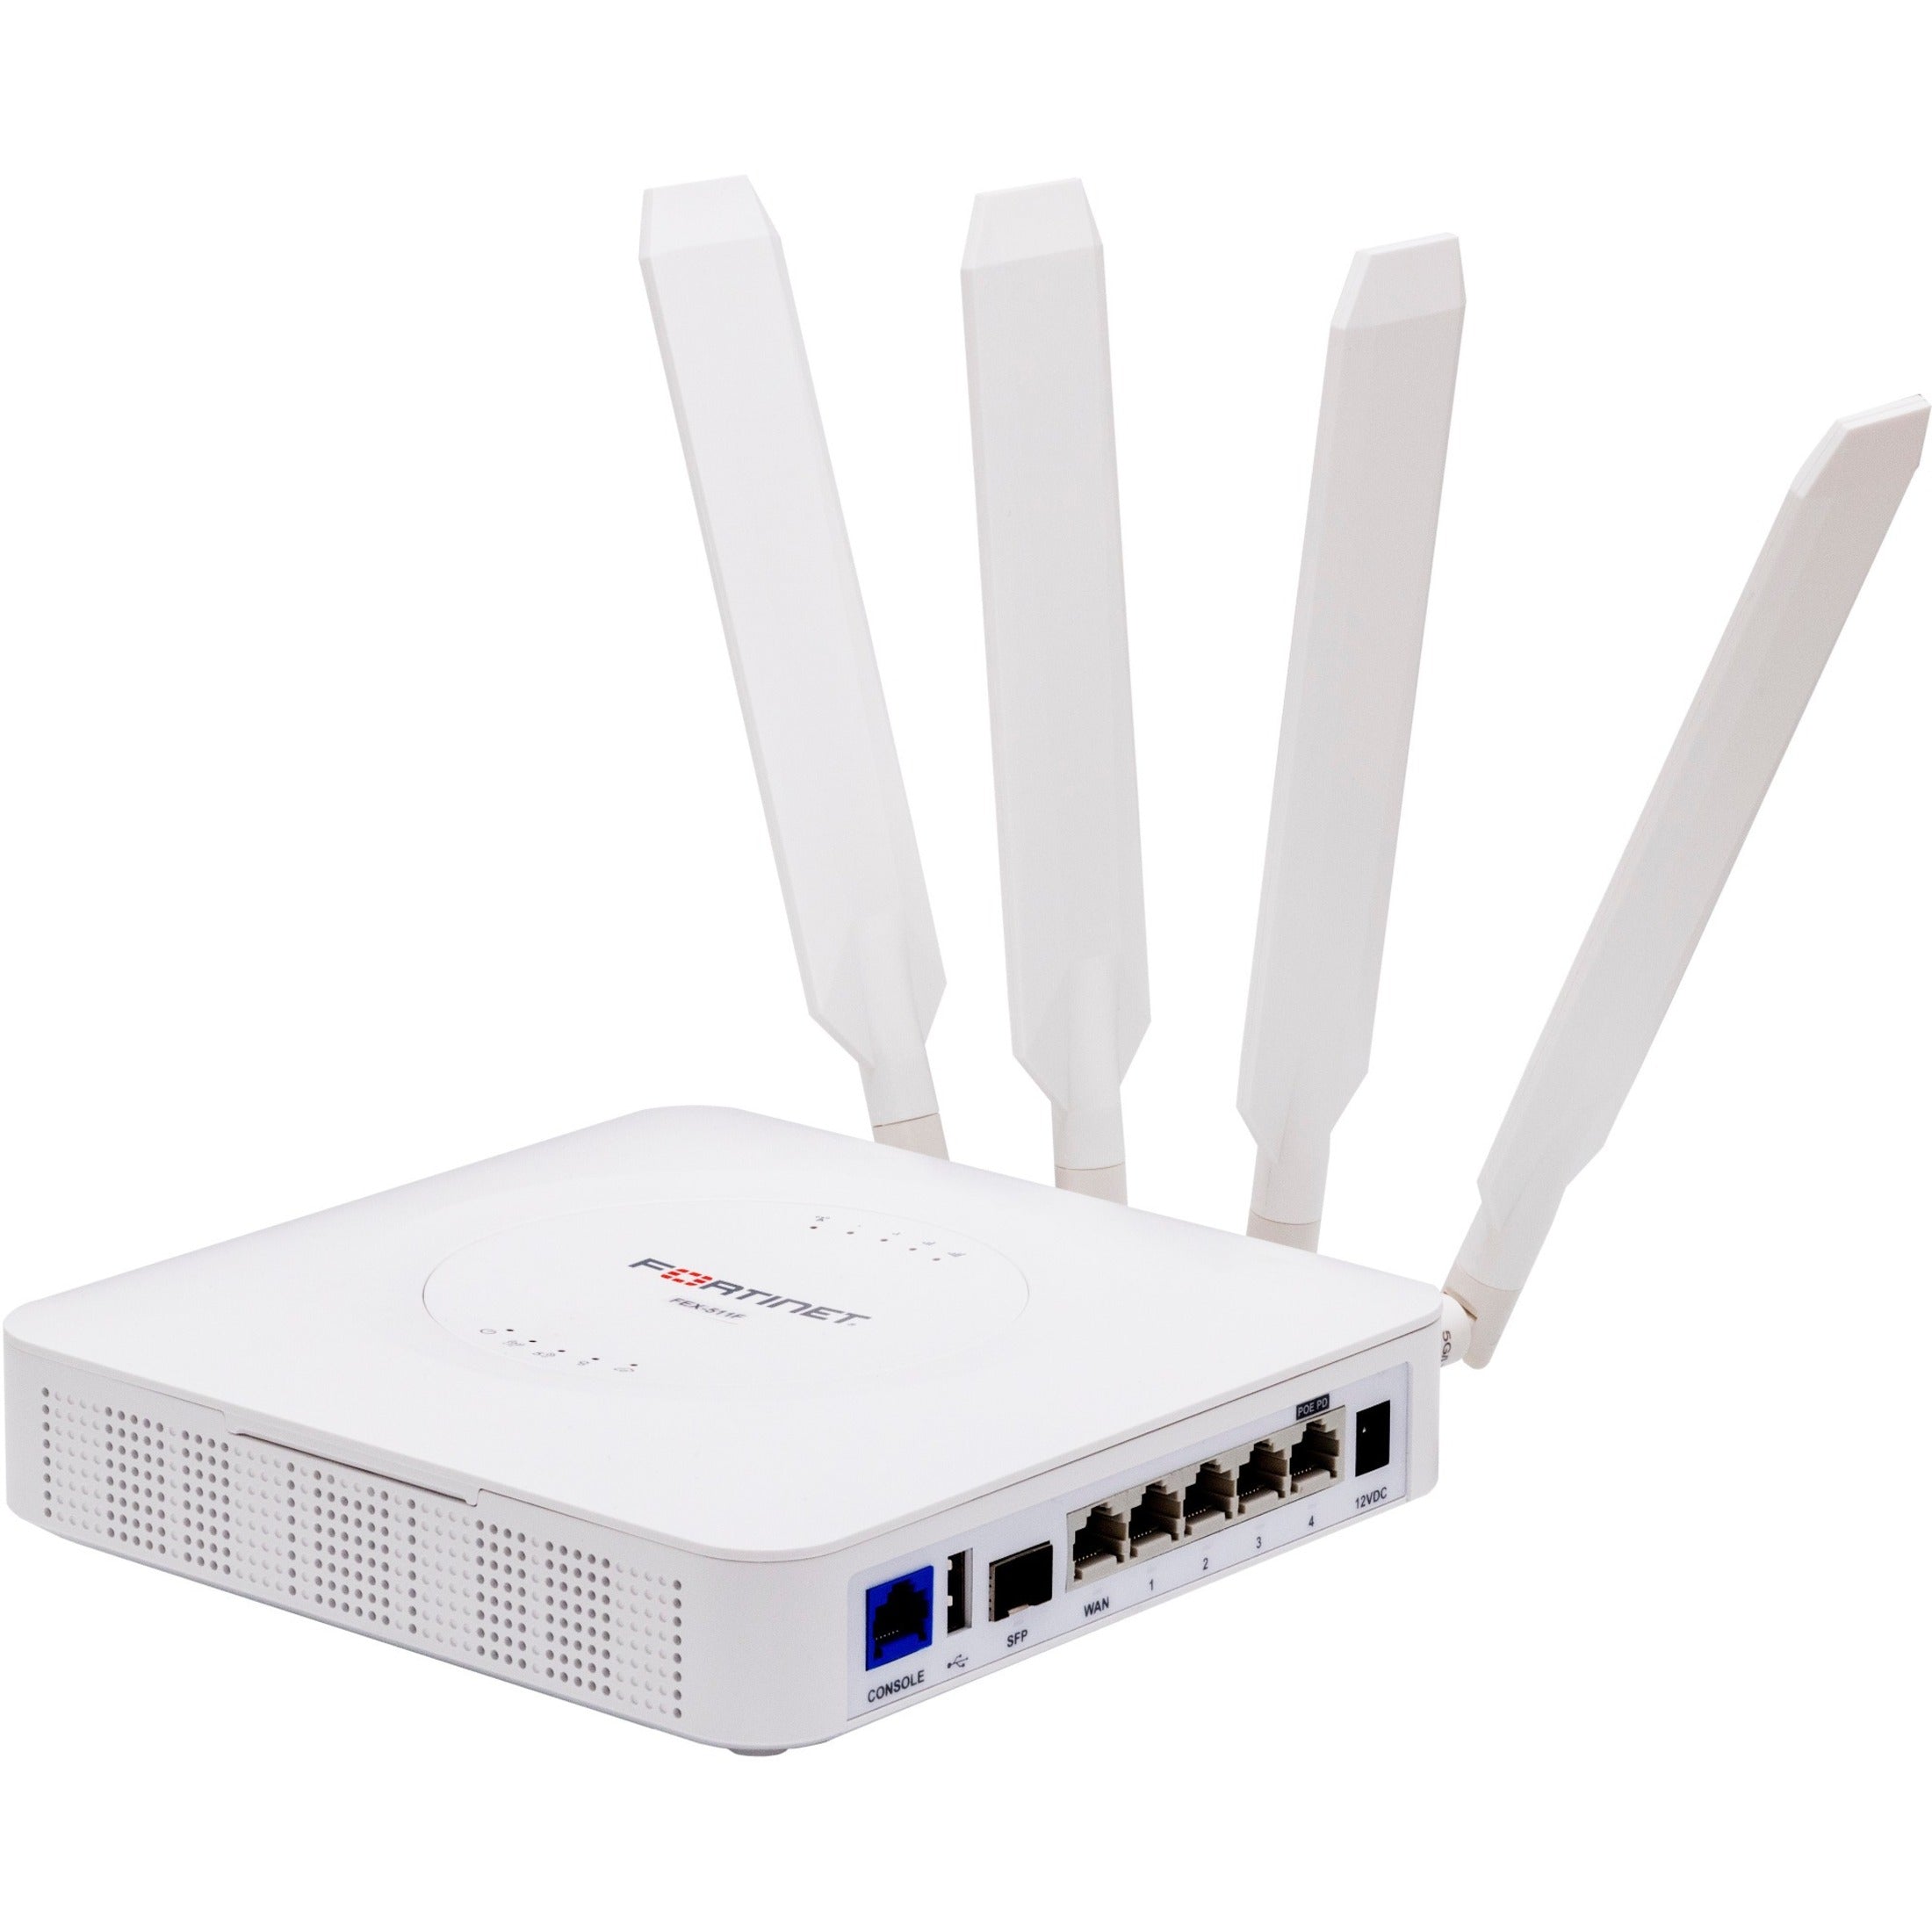 Fortinet Indoor Broadband Wireless WAN Router with 1x Dual SIM 3G/4G LTE CAT6 M.2 Module  (FEX-101F-AM)